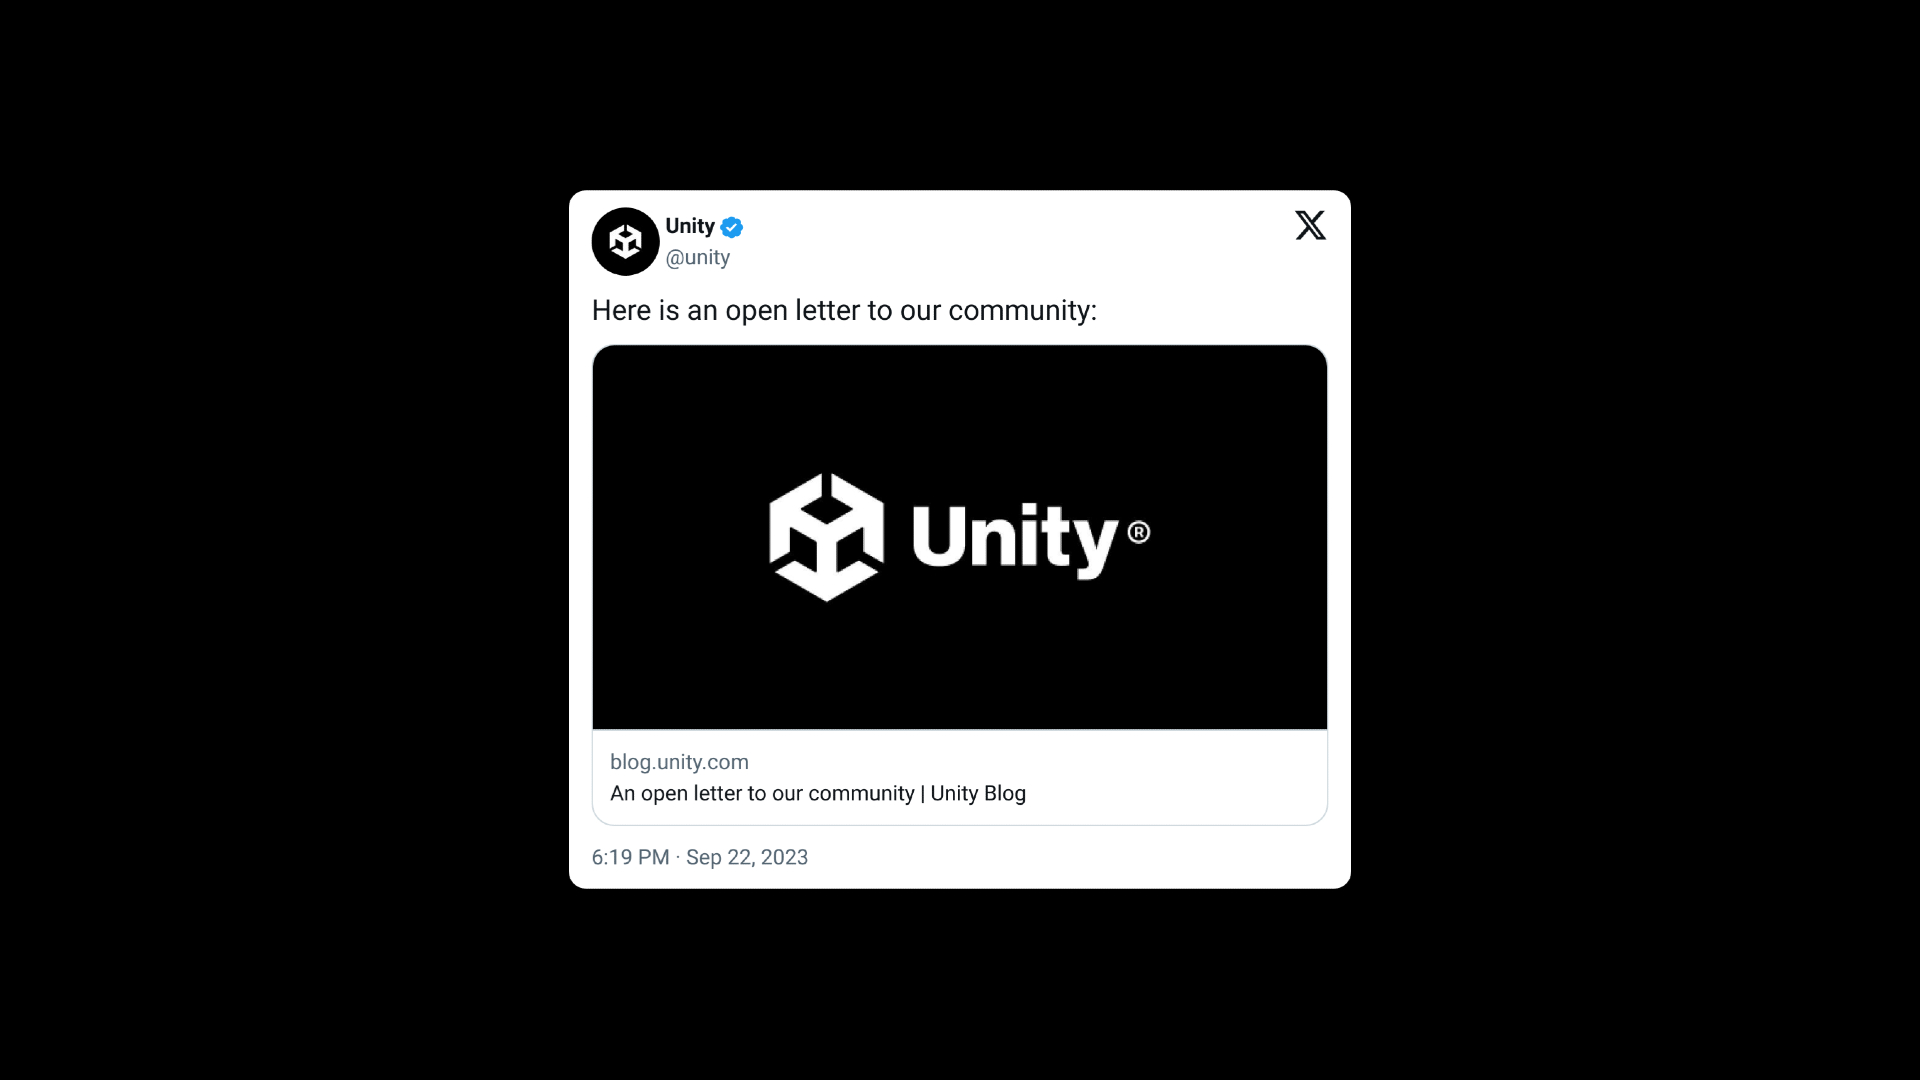 Unity's update post on Twitter detailing the changes to the controversial fee policy